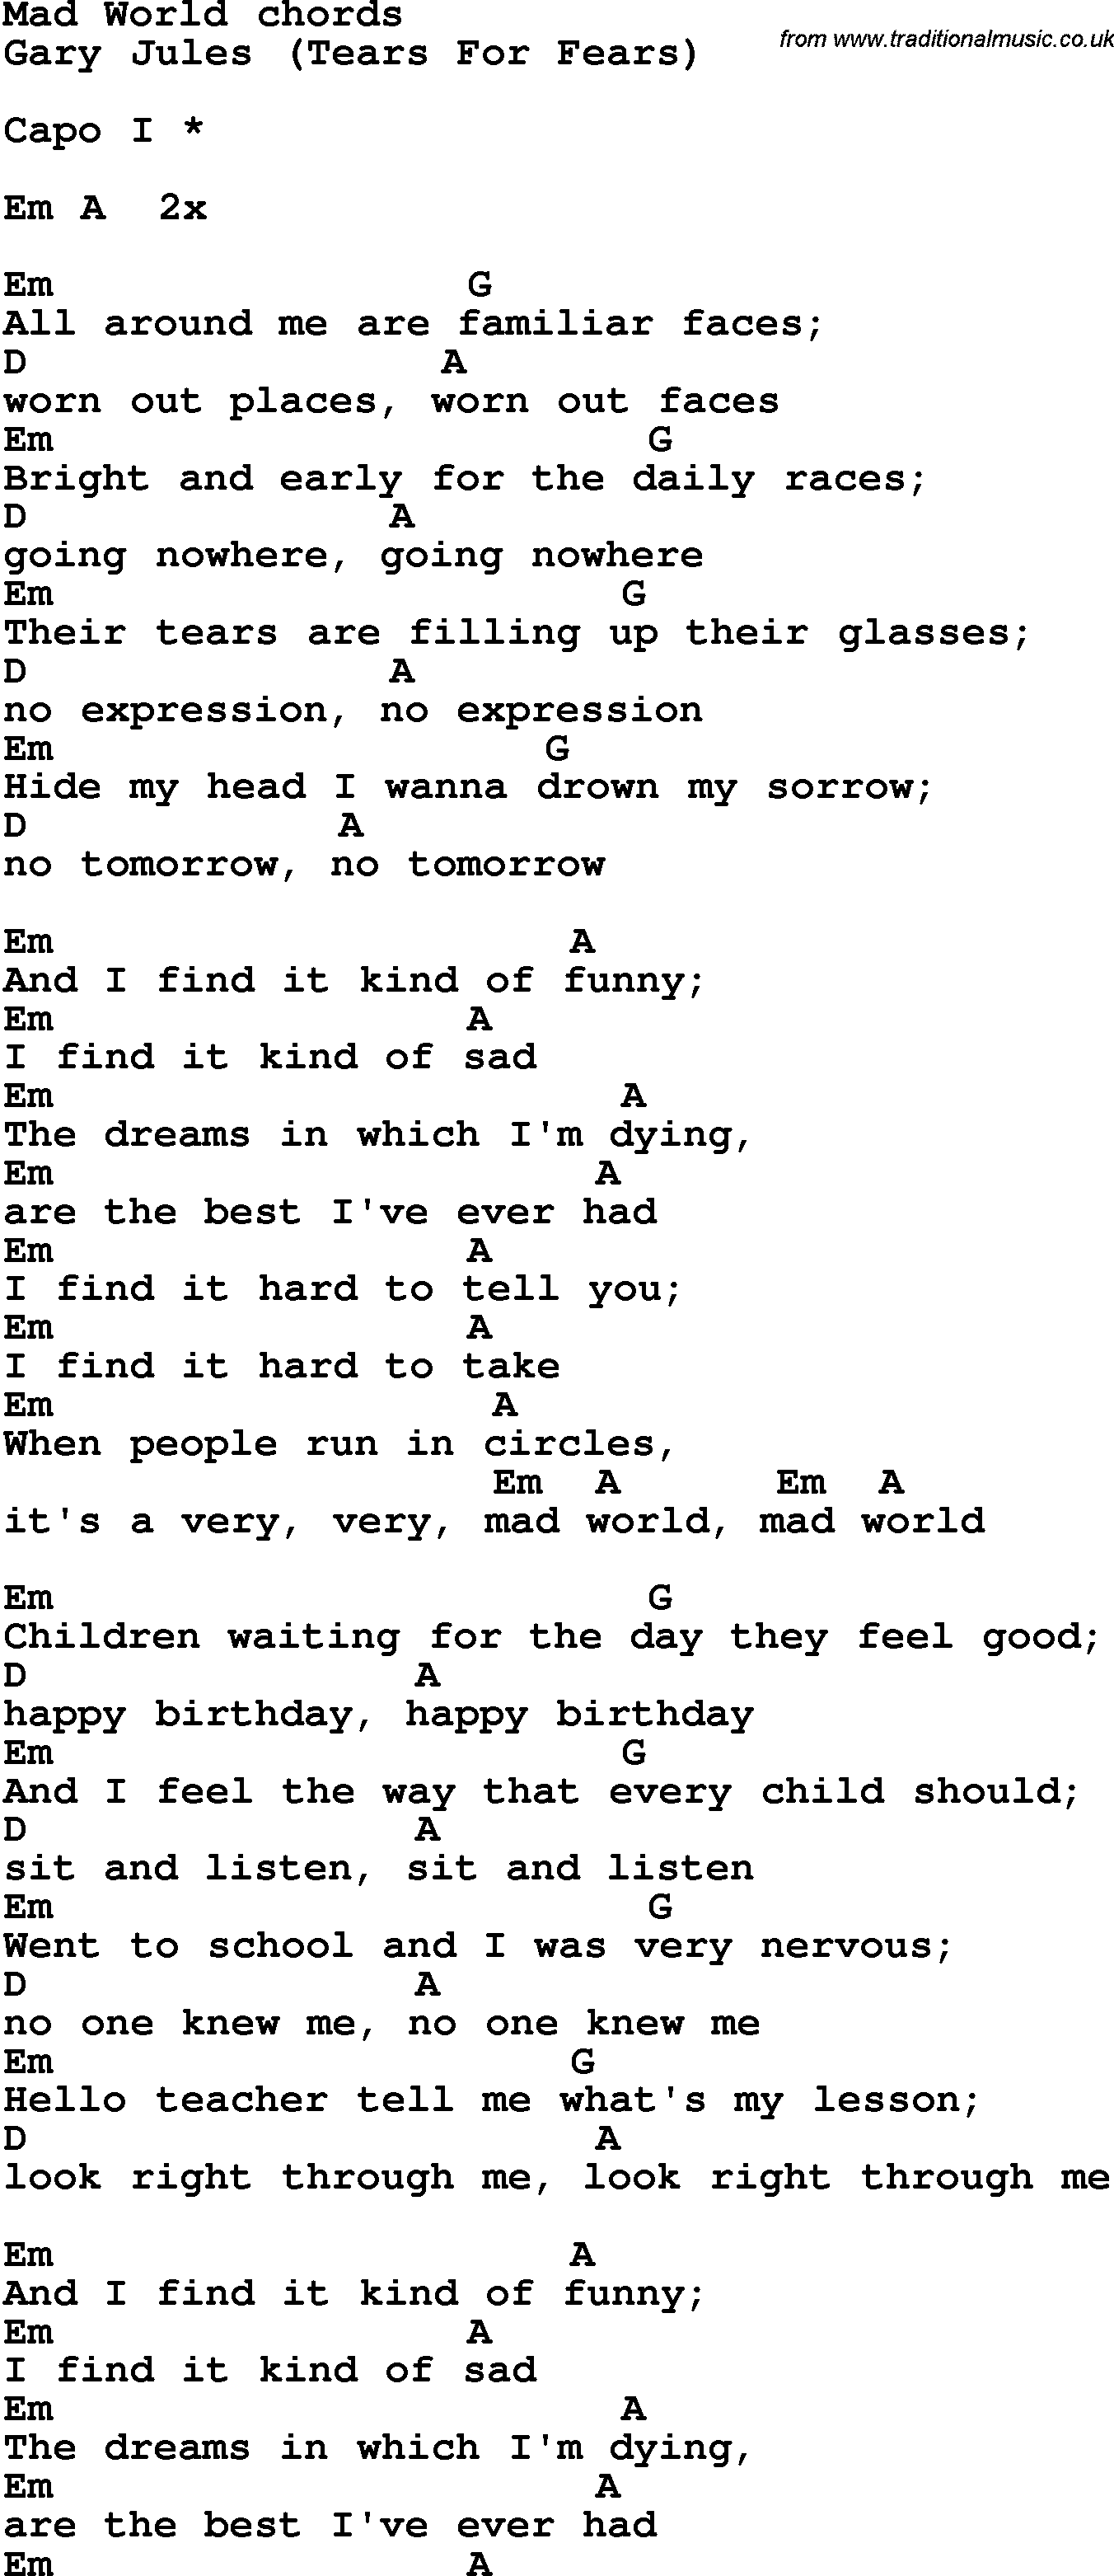 Song Lyrics with guitar chords for Mad World